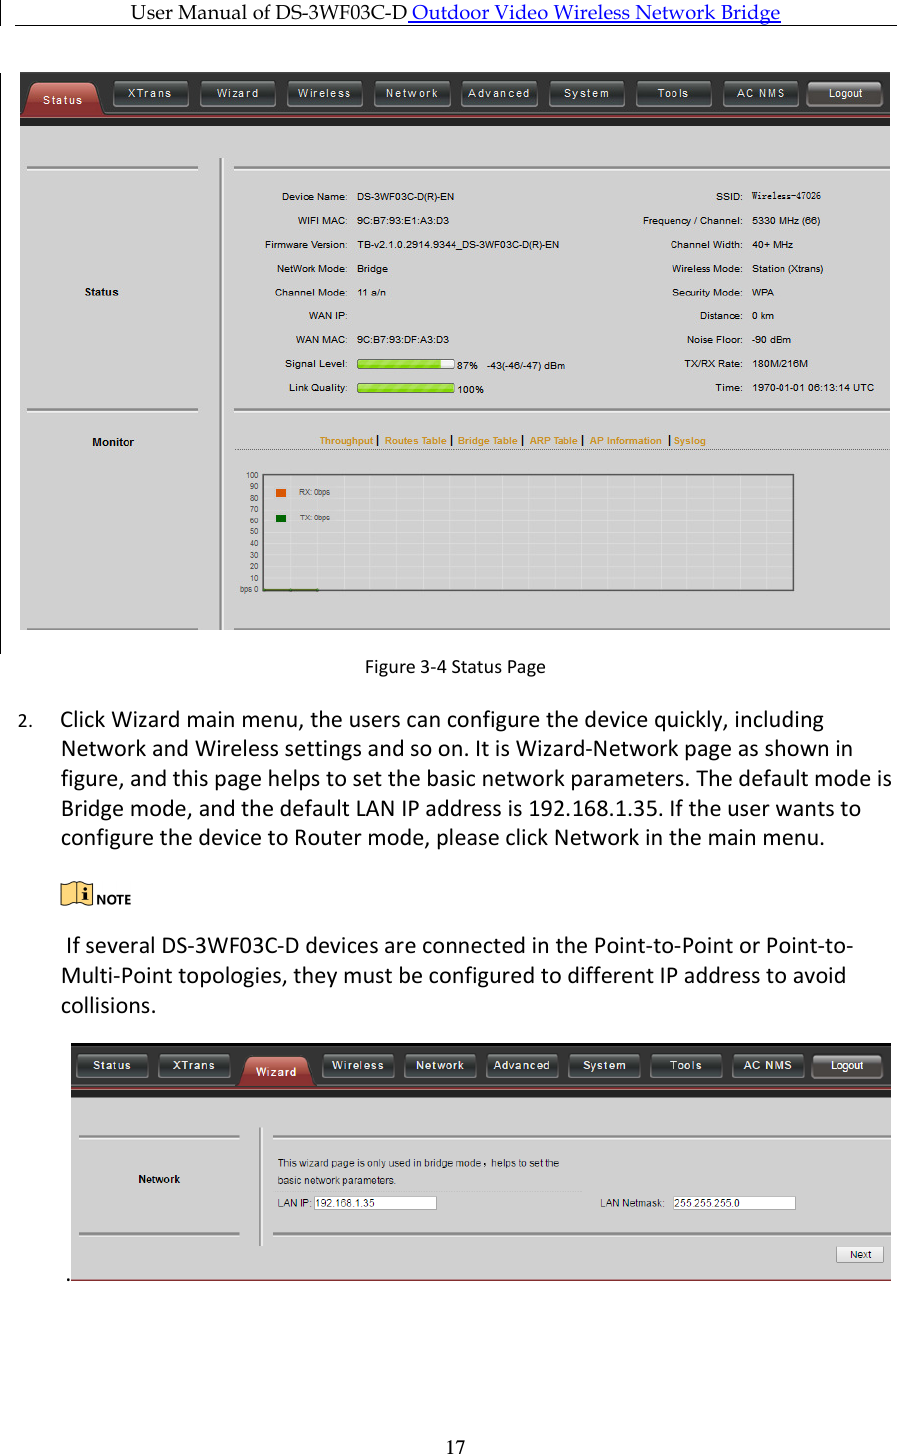 User Manual of DS-3WF03C-D Outdoor Video Wireless Network Bridge      17  Figure 3-4 Status Page 2. Click Wizard main menu, the users can configure the device quickly, including Network and Wireless settings and so on. It is Wizard-Network page as shown in figure, and this page helps to set the basic network parameters. The default mode is Bridge mode, and the default LAN IP address is 192.168.1.35. If the user wants to configure the device to Router mode, please click Network in the main menu.   If several DS-3WF03C-D devices are connected in the Point-to-Point or Point-to-Multi-Point topologies, they must be configured to different IP address to avoid collisions. . 